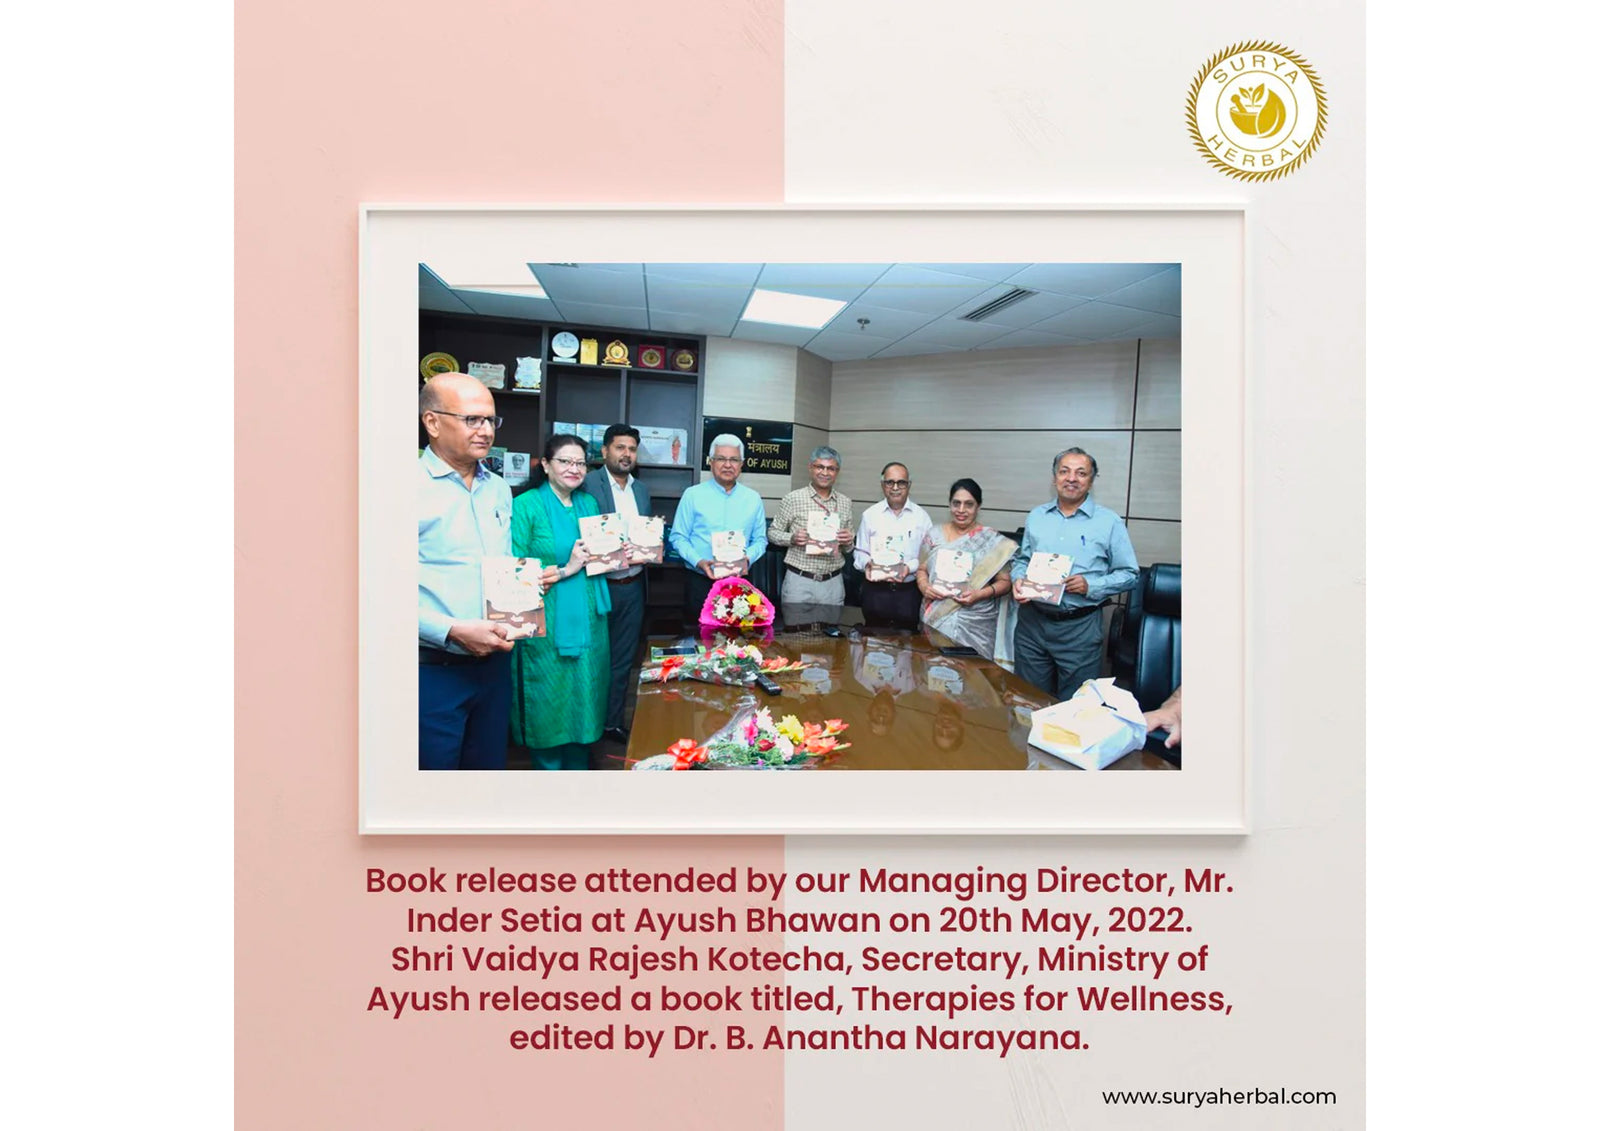 A Literary Leap into Wellness: Surya Herbal Limited's Managing Director at a Book Release